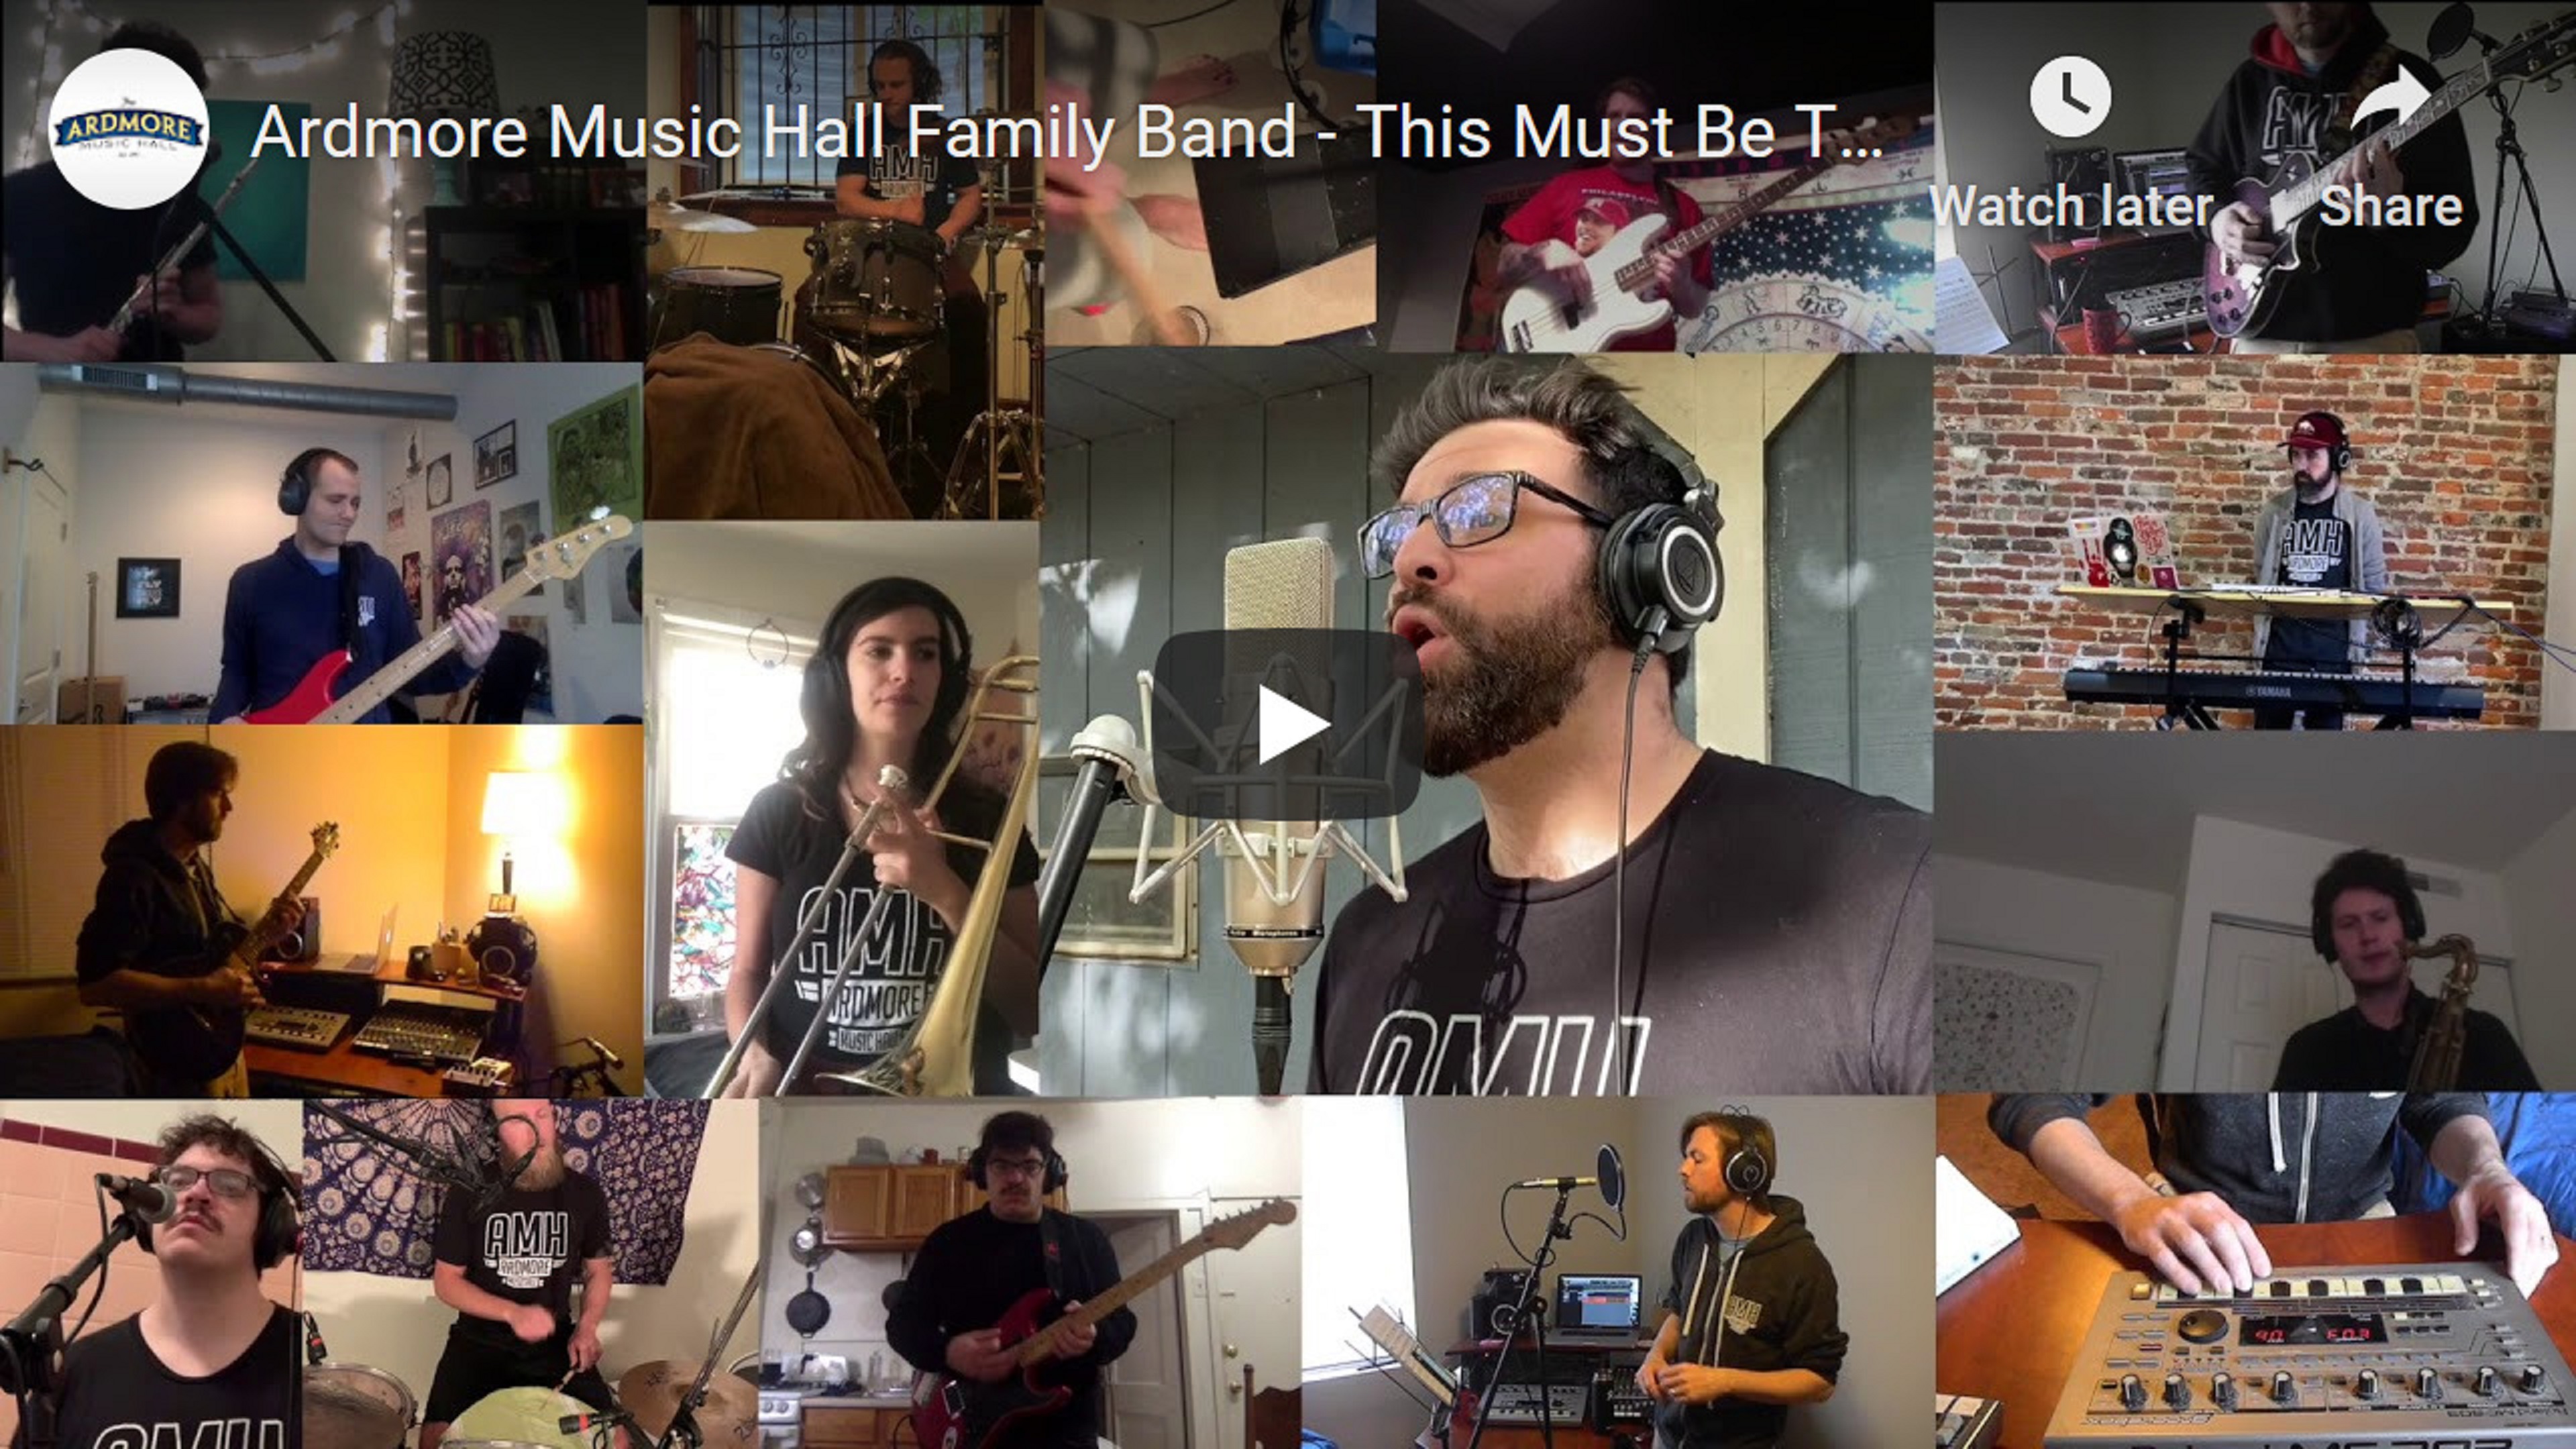 Ardmore Music Hall Announces Staff Family Band, Audio and Video Releases, and Support for Independent Venues